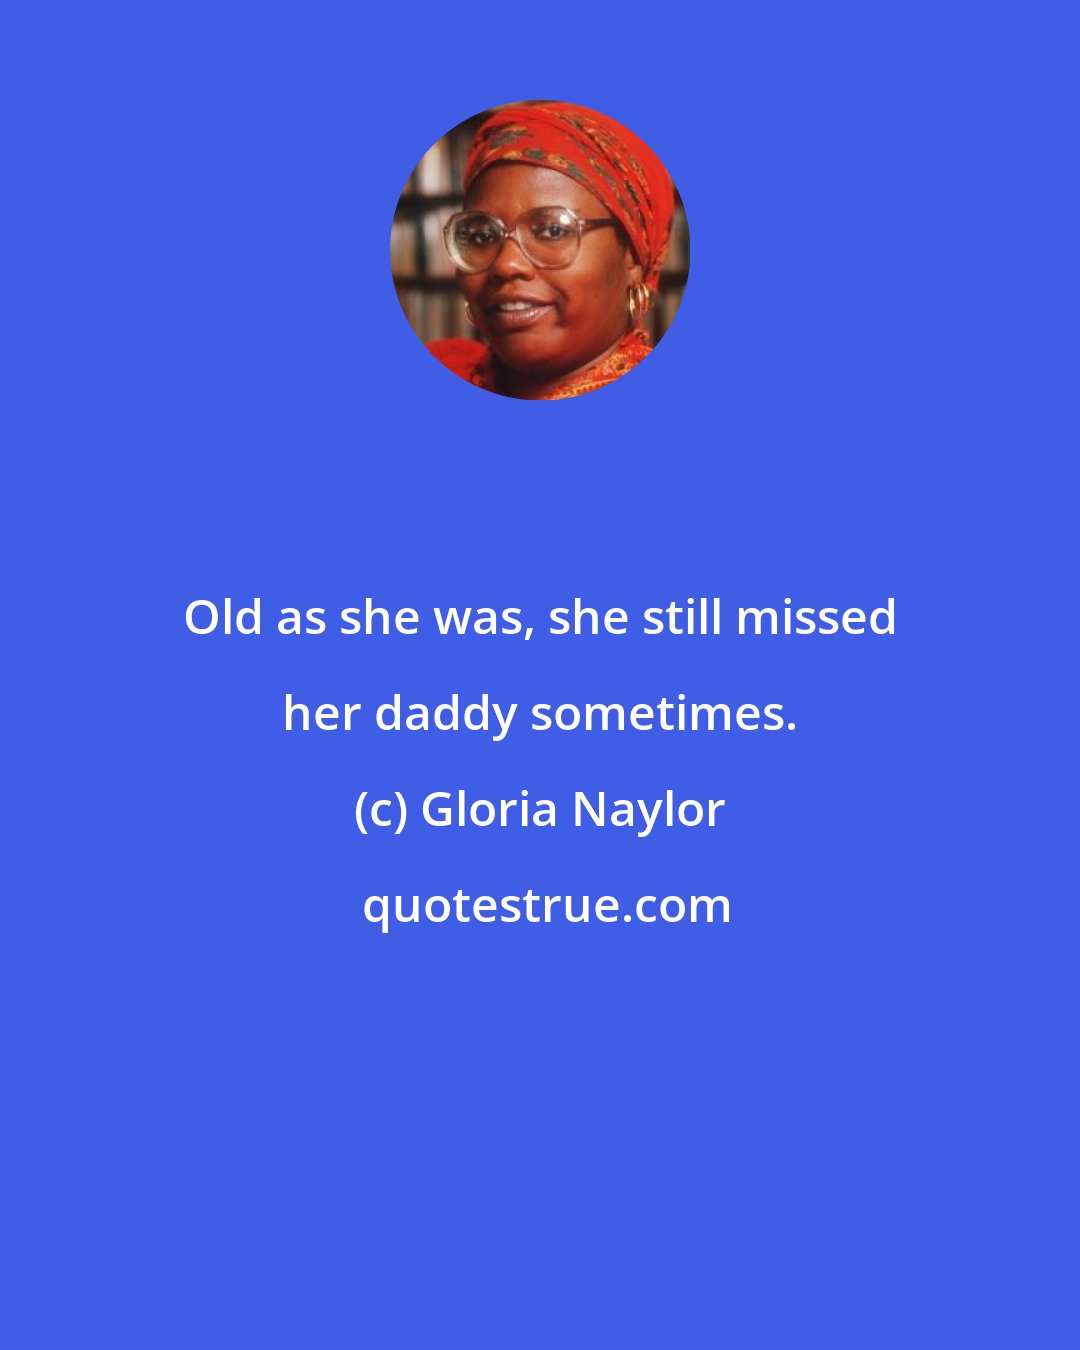 Gloria Naylor: Old as she was, she still missed her daddy sometimes.